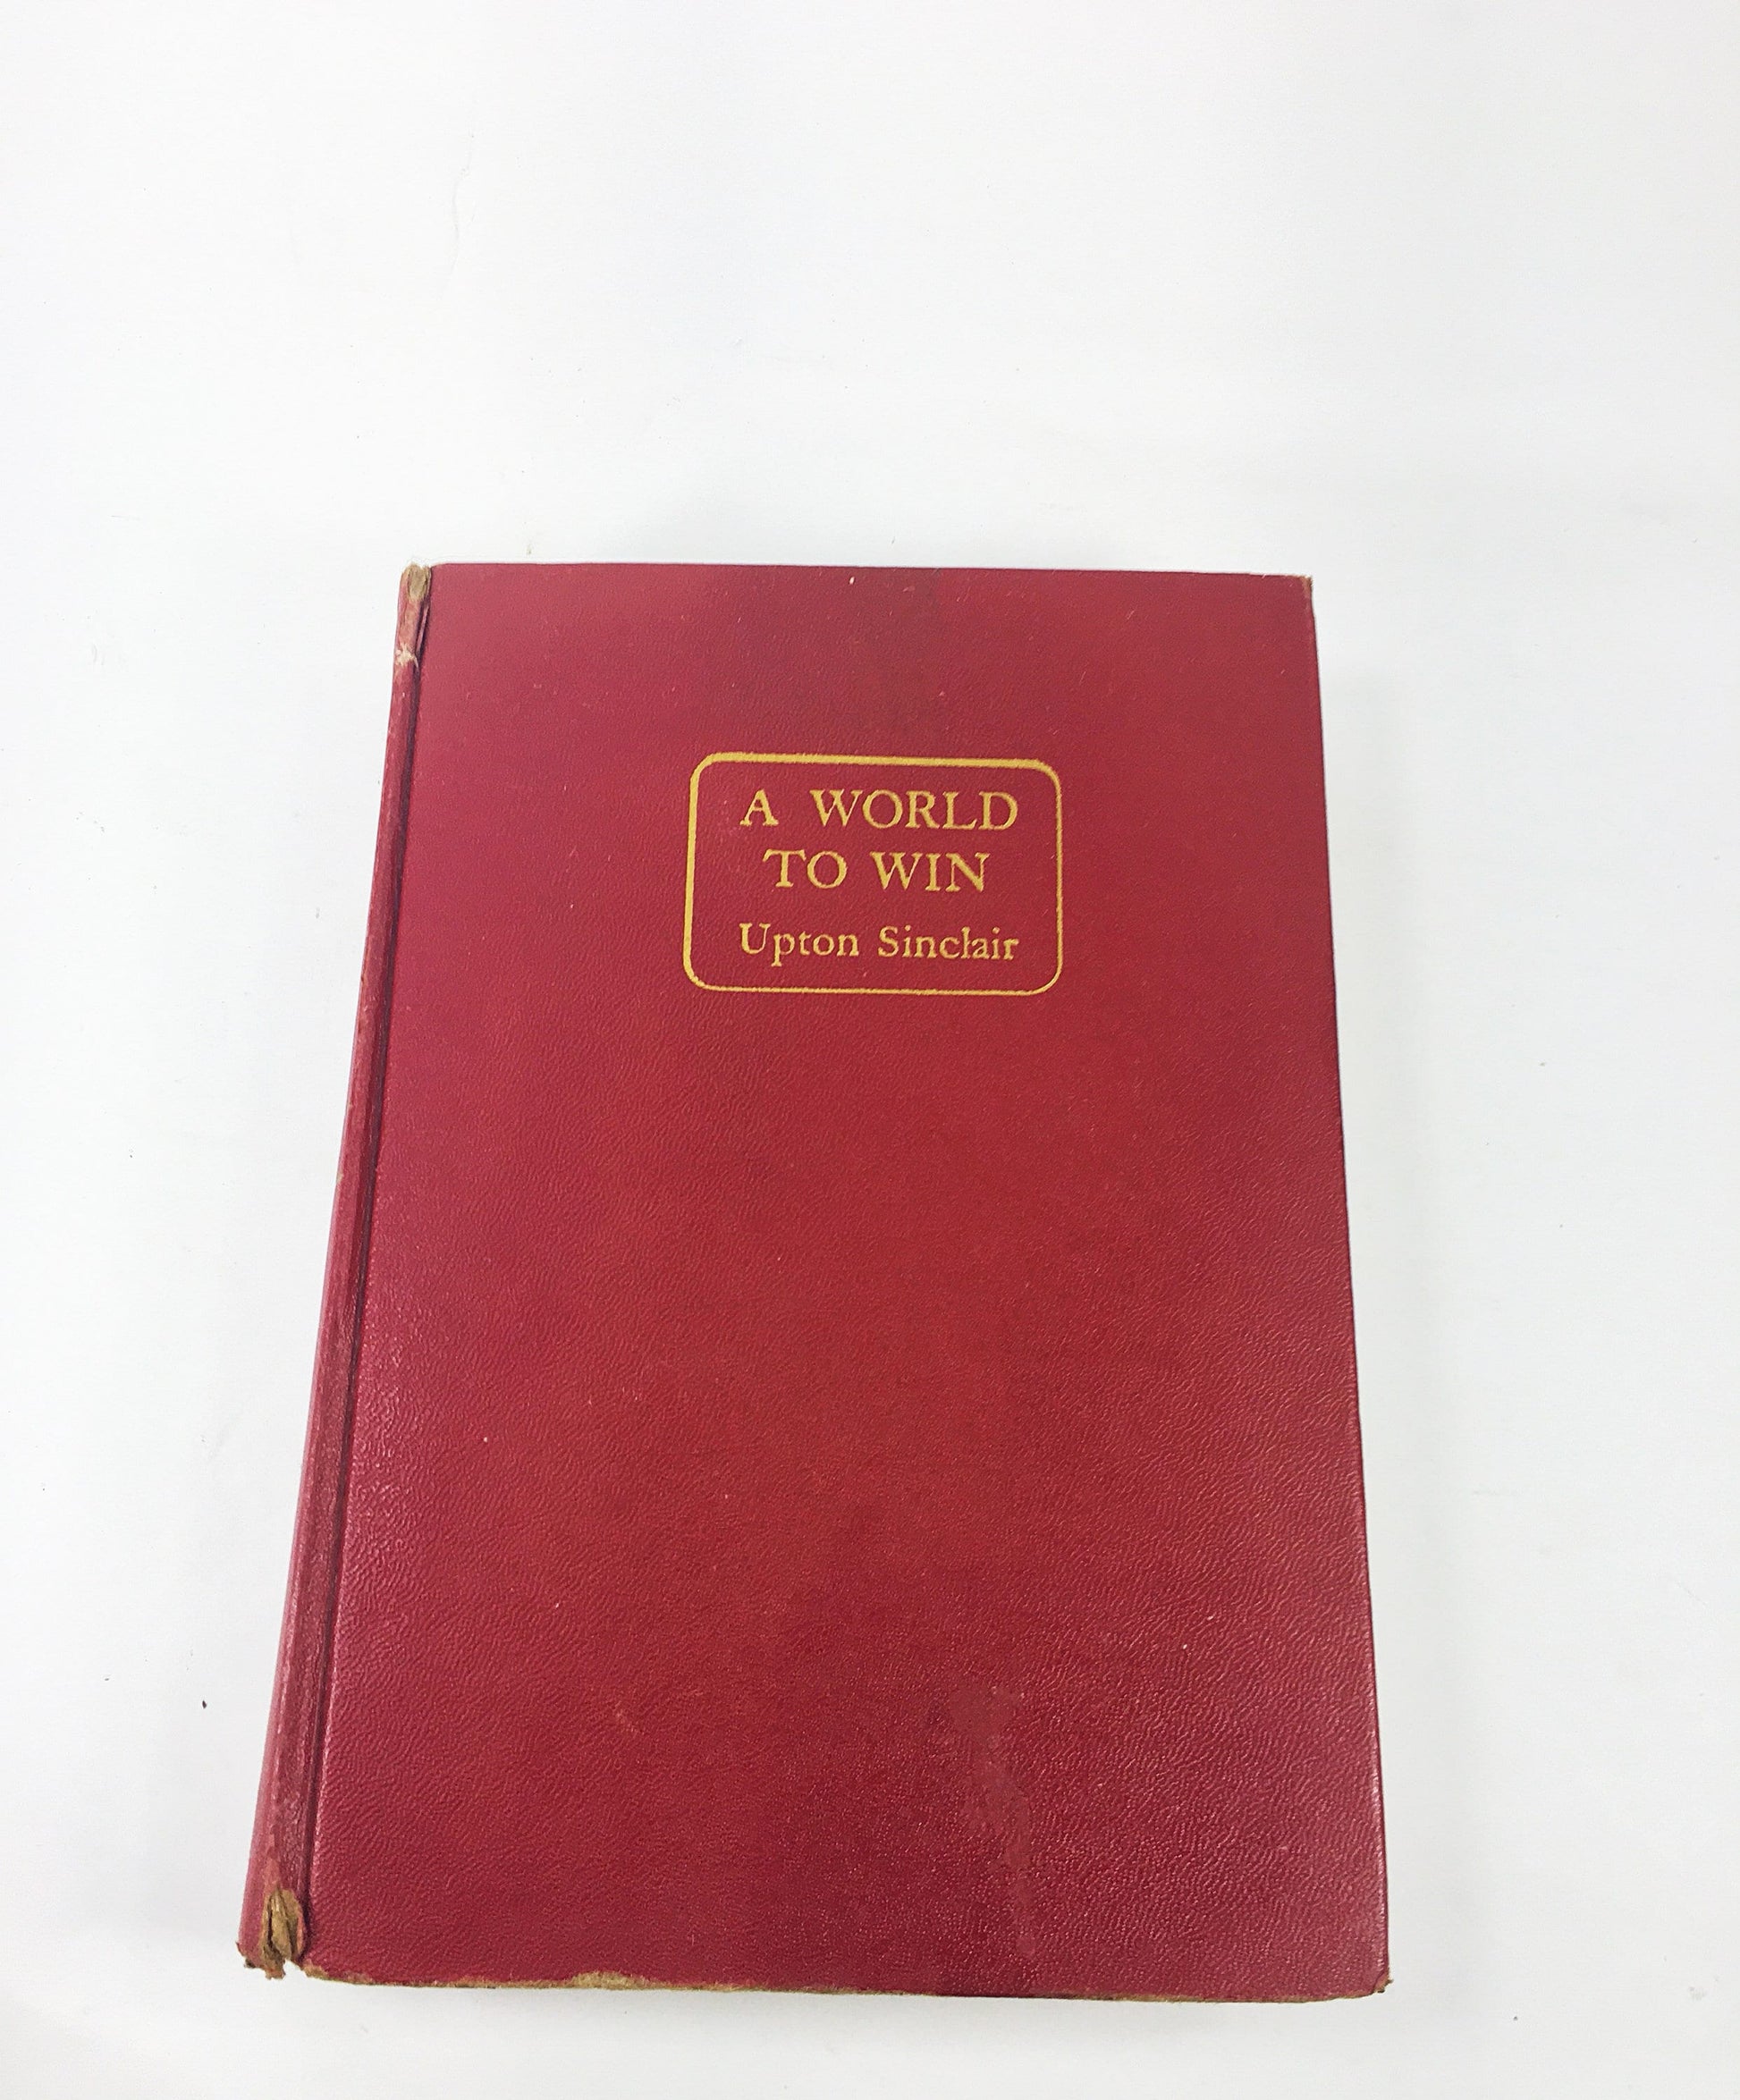 A World to Win by Upton Sinclair. FIRST EDITION vintage book circa 1946. Lanny Budd series. Pulitzer Prize winning author. Red book decor